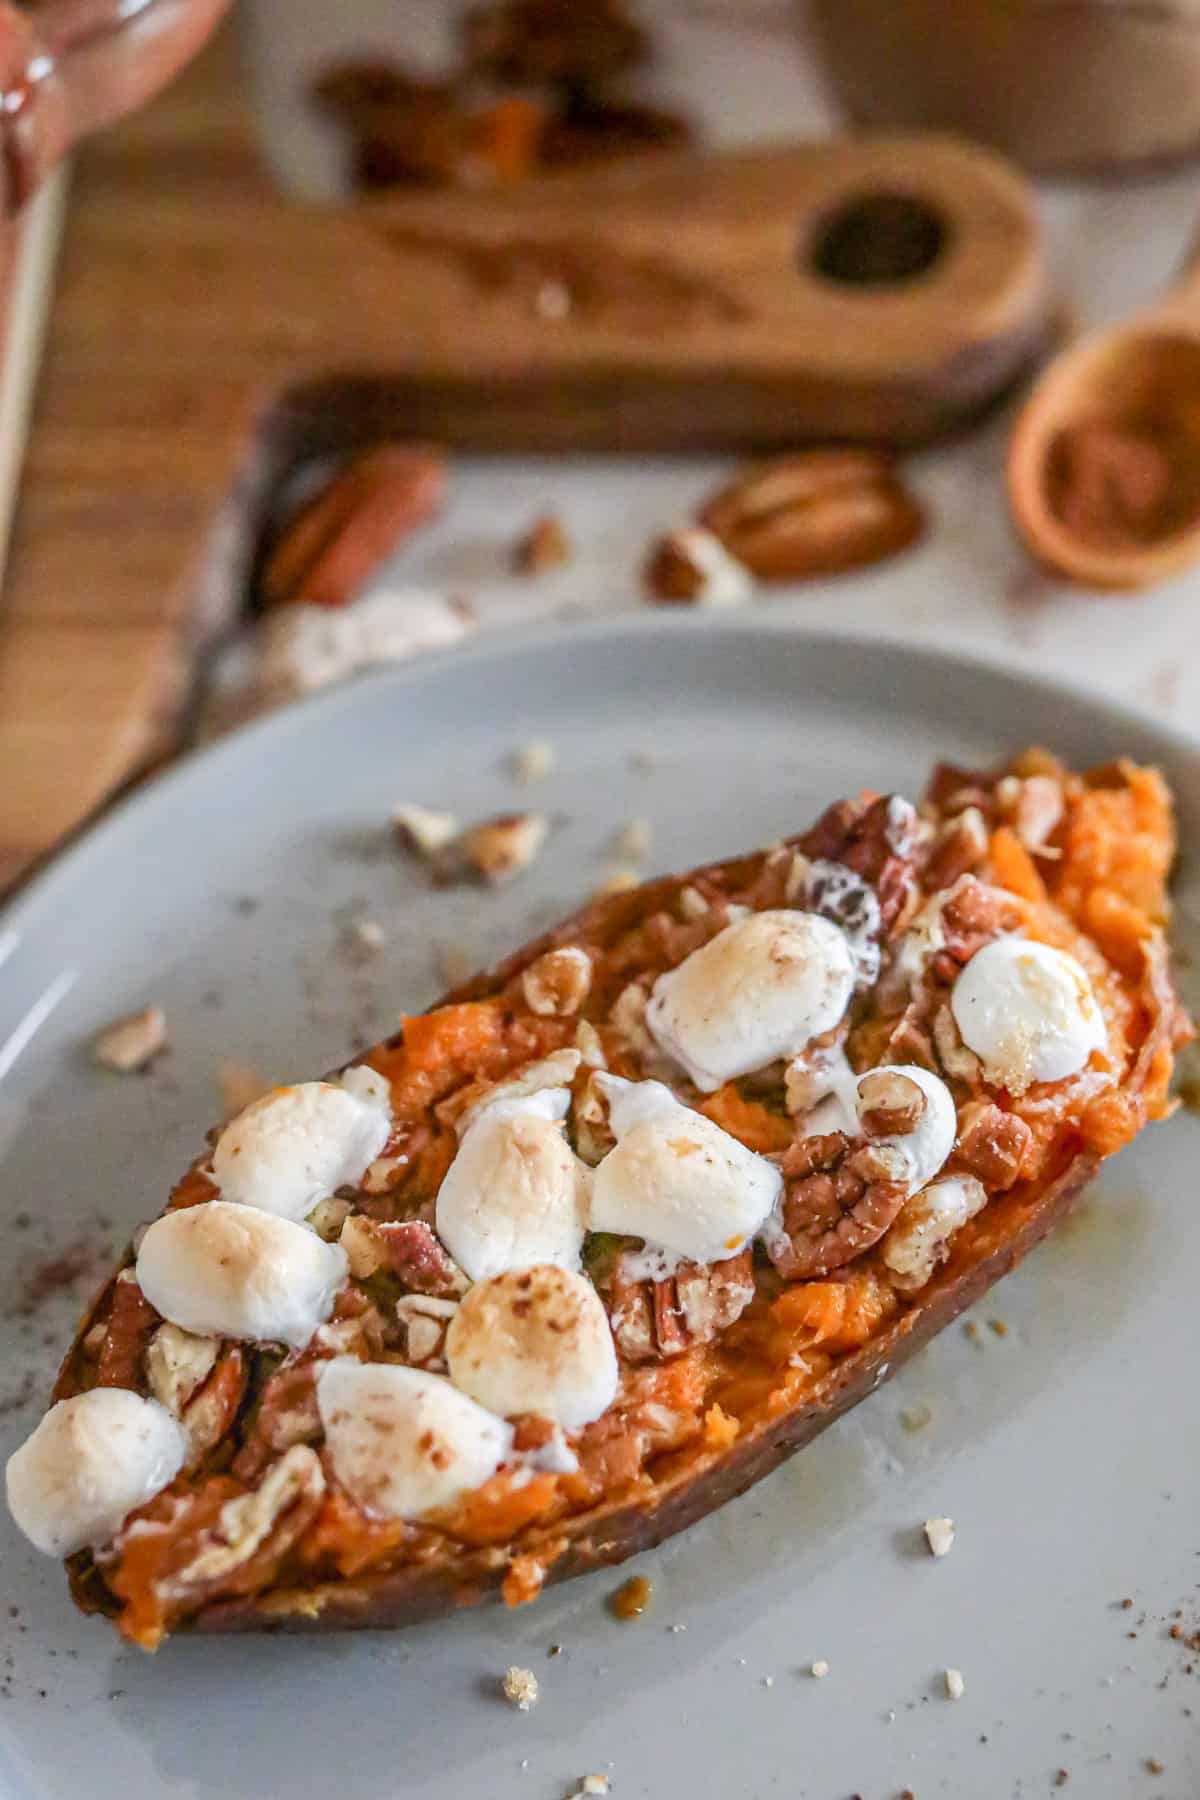 Close up of a sweet potato topped with mini marshmallows.